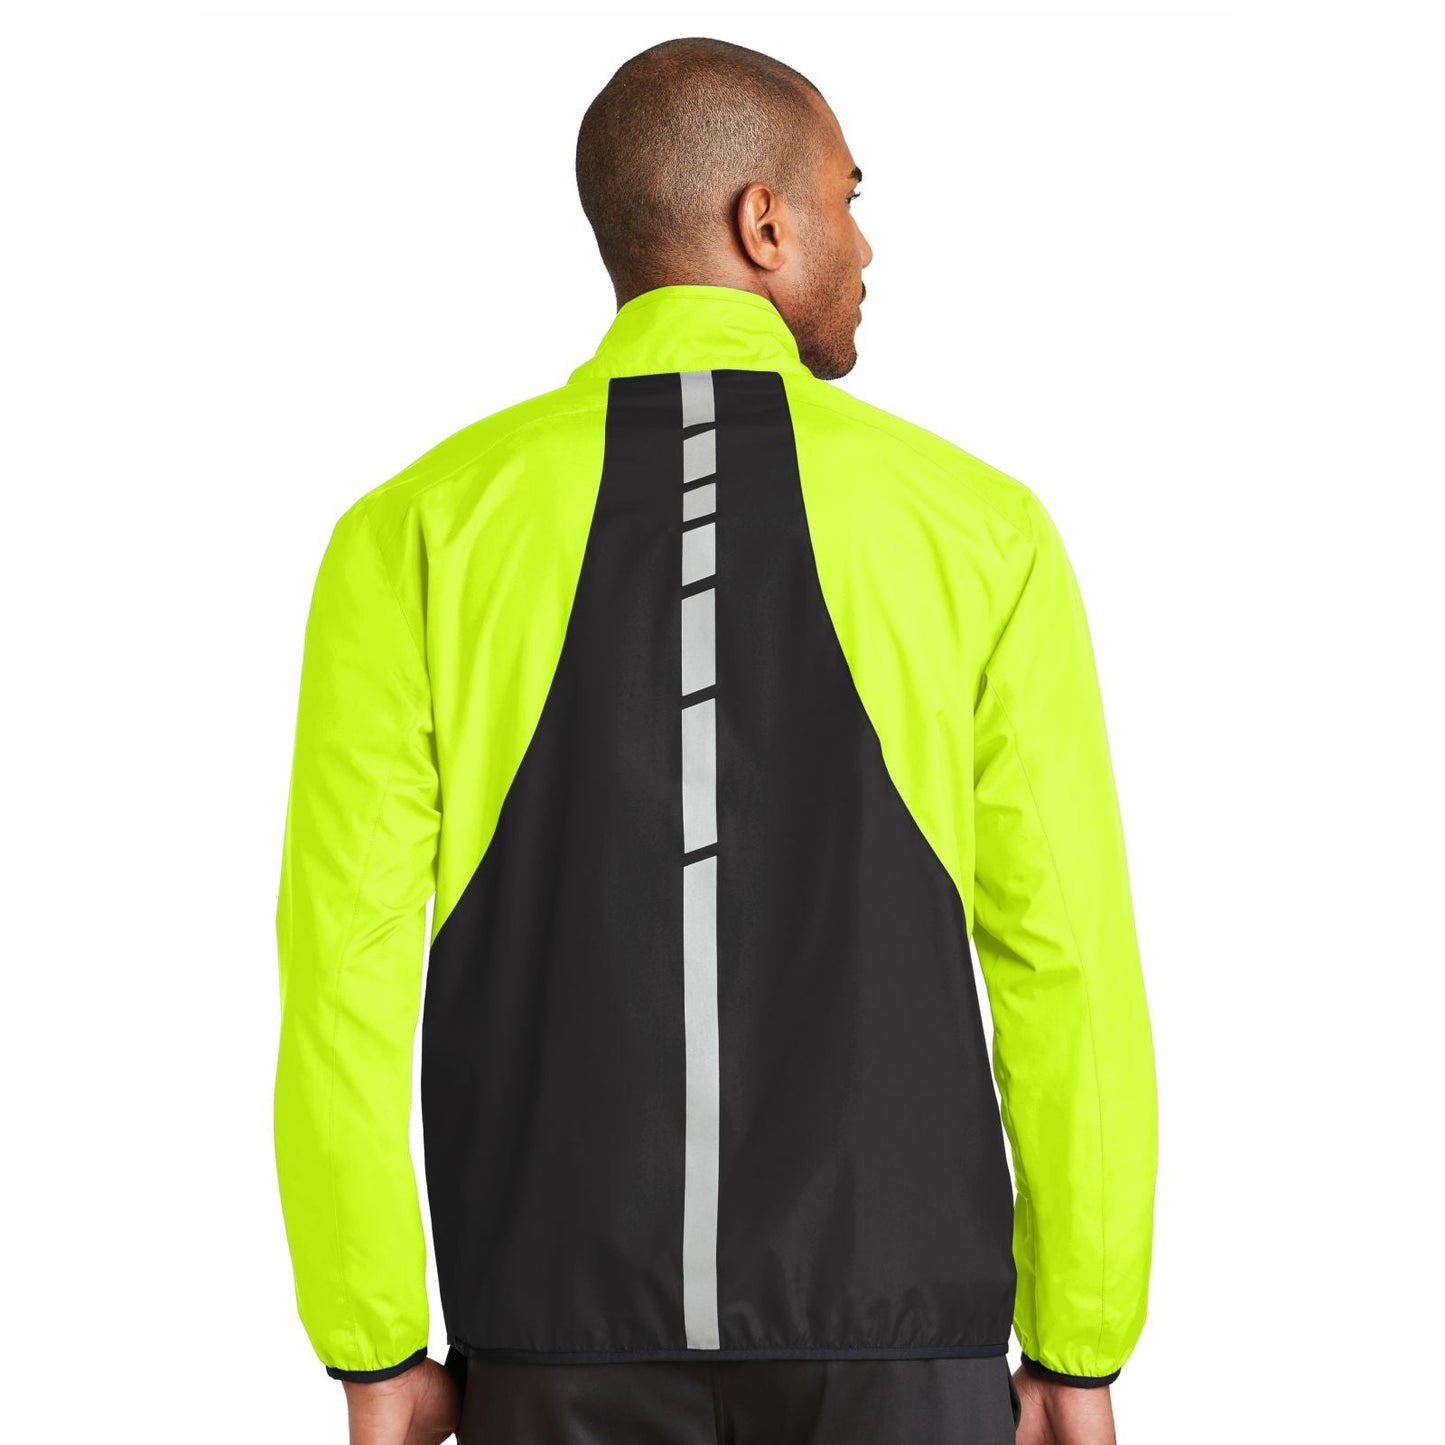 Philly Bike Ride Men's Zip Windbreaker -Safety Yellow- Embroidered